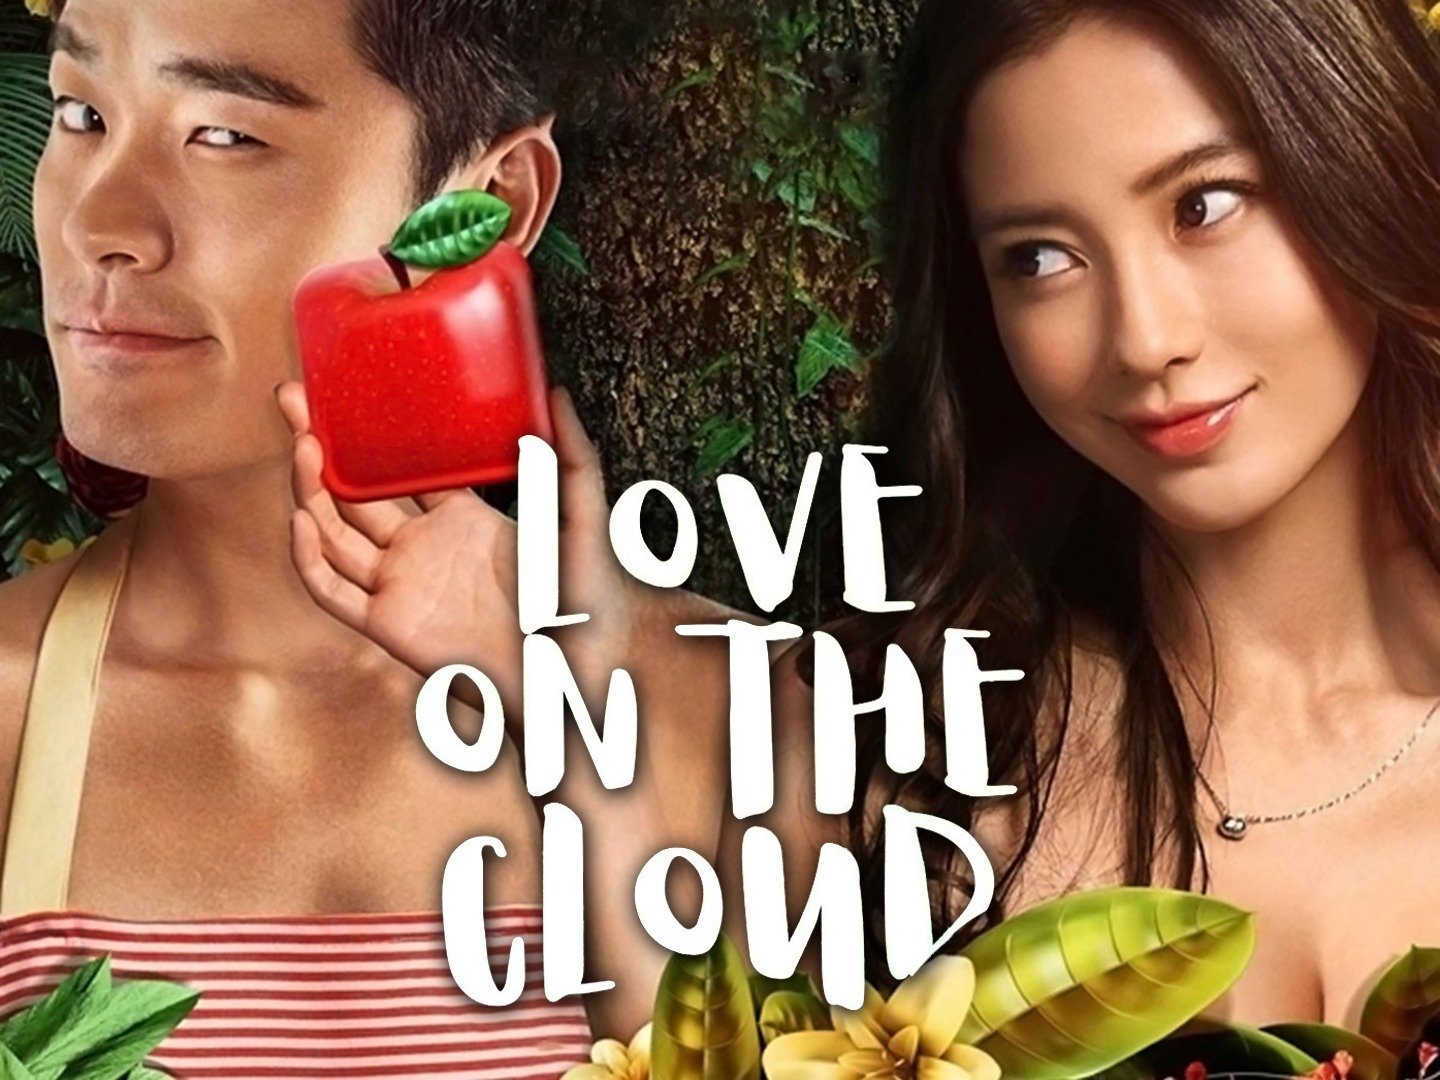 Love On The Cloud Trailer 1 Trailers And Videos Rotten Tomatoes